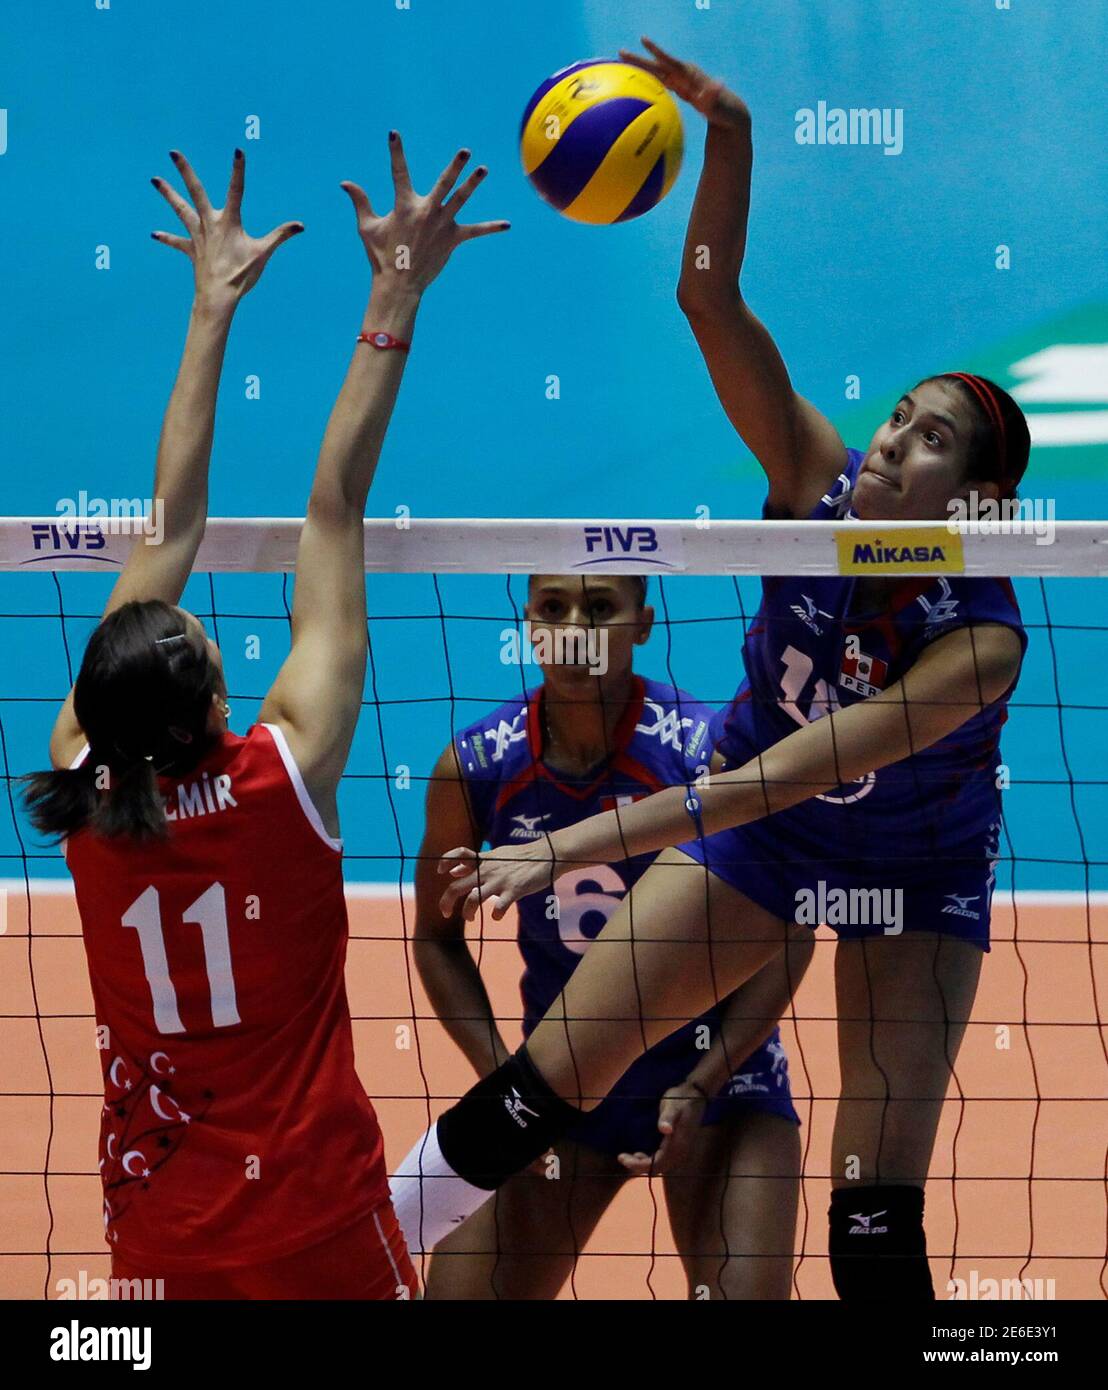 Peru's Karla Ortiz (R) spikes the ball against Turkey's Naz Aydemir (11)  while Peru's Jessenia Uceda looks on during their second round match of the  FIVB Women's Volleyball World Championship in Tokyo